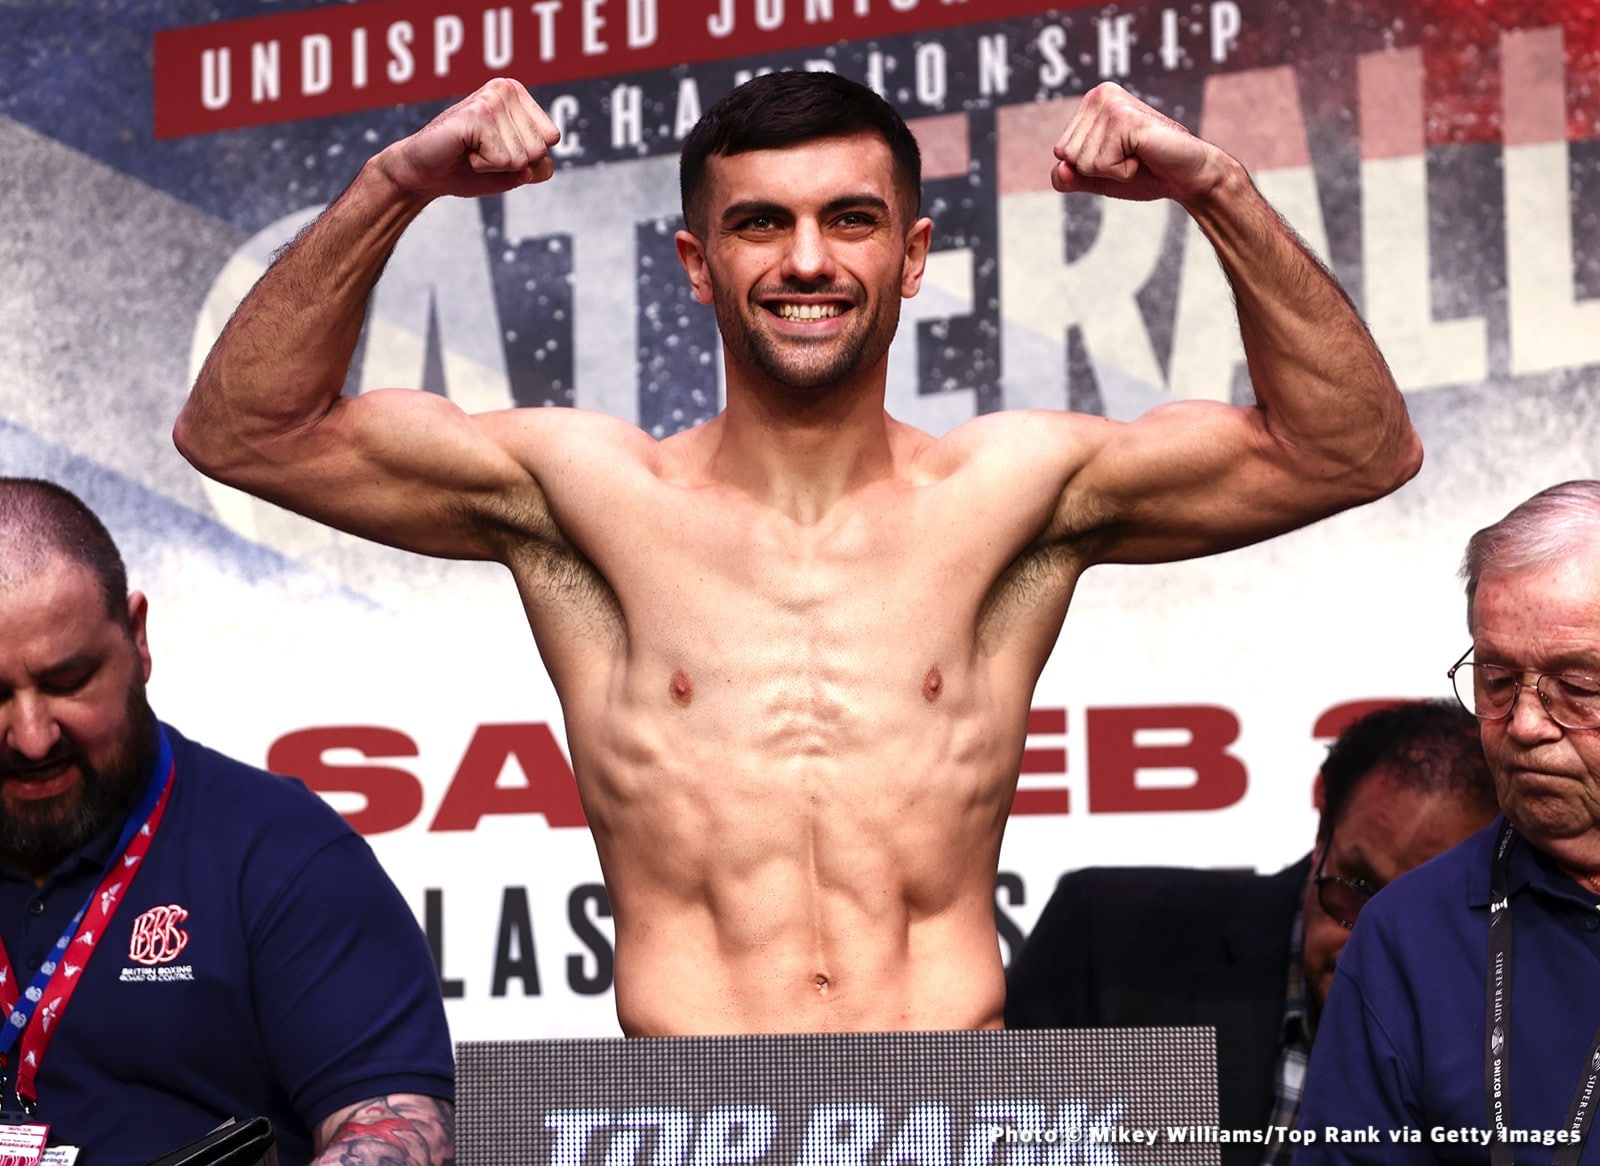 Image: Catterall vs. Linares: Date, Start Time & Undercard Info